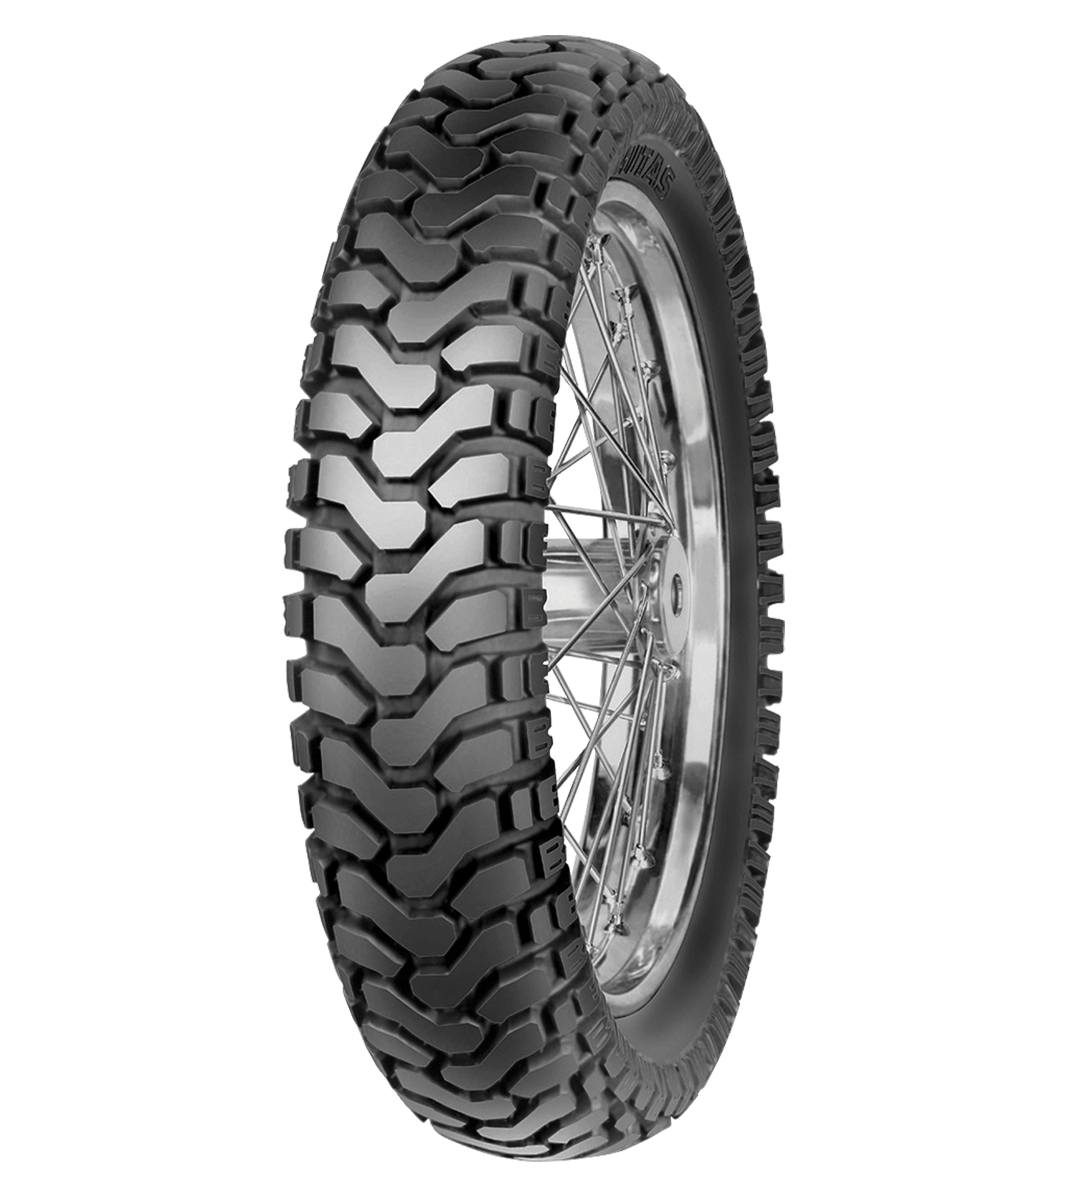 Mitas E-07 ENDURO 120/90-17 Trail OFF Trail 64S No Stripe Tubeless Rear Tire, 224130, 120/90-17, Adventure Touring, E Series, E-07 Enduro, Rear, Trail, Trail OFF, Tires - Imported and distributed in North & South America by Lindeco Genuine Powersports - Premier Powersports Equipment and Accessories for Motorcycle Enthusiasts, Professional Riders and Dealers.